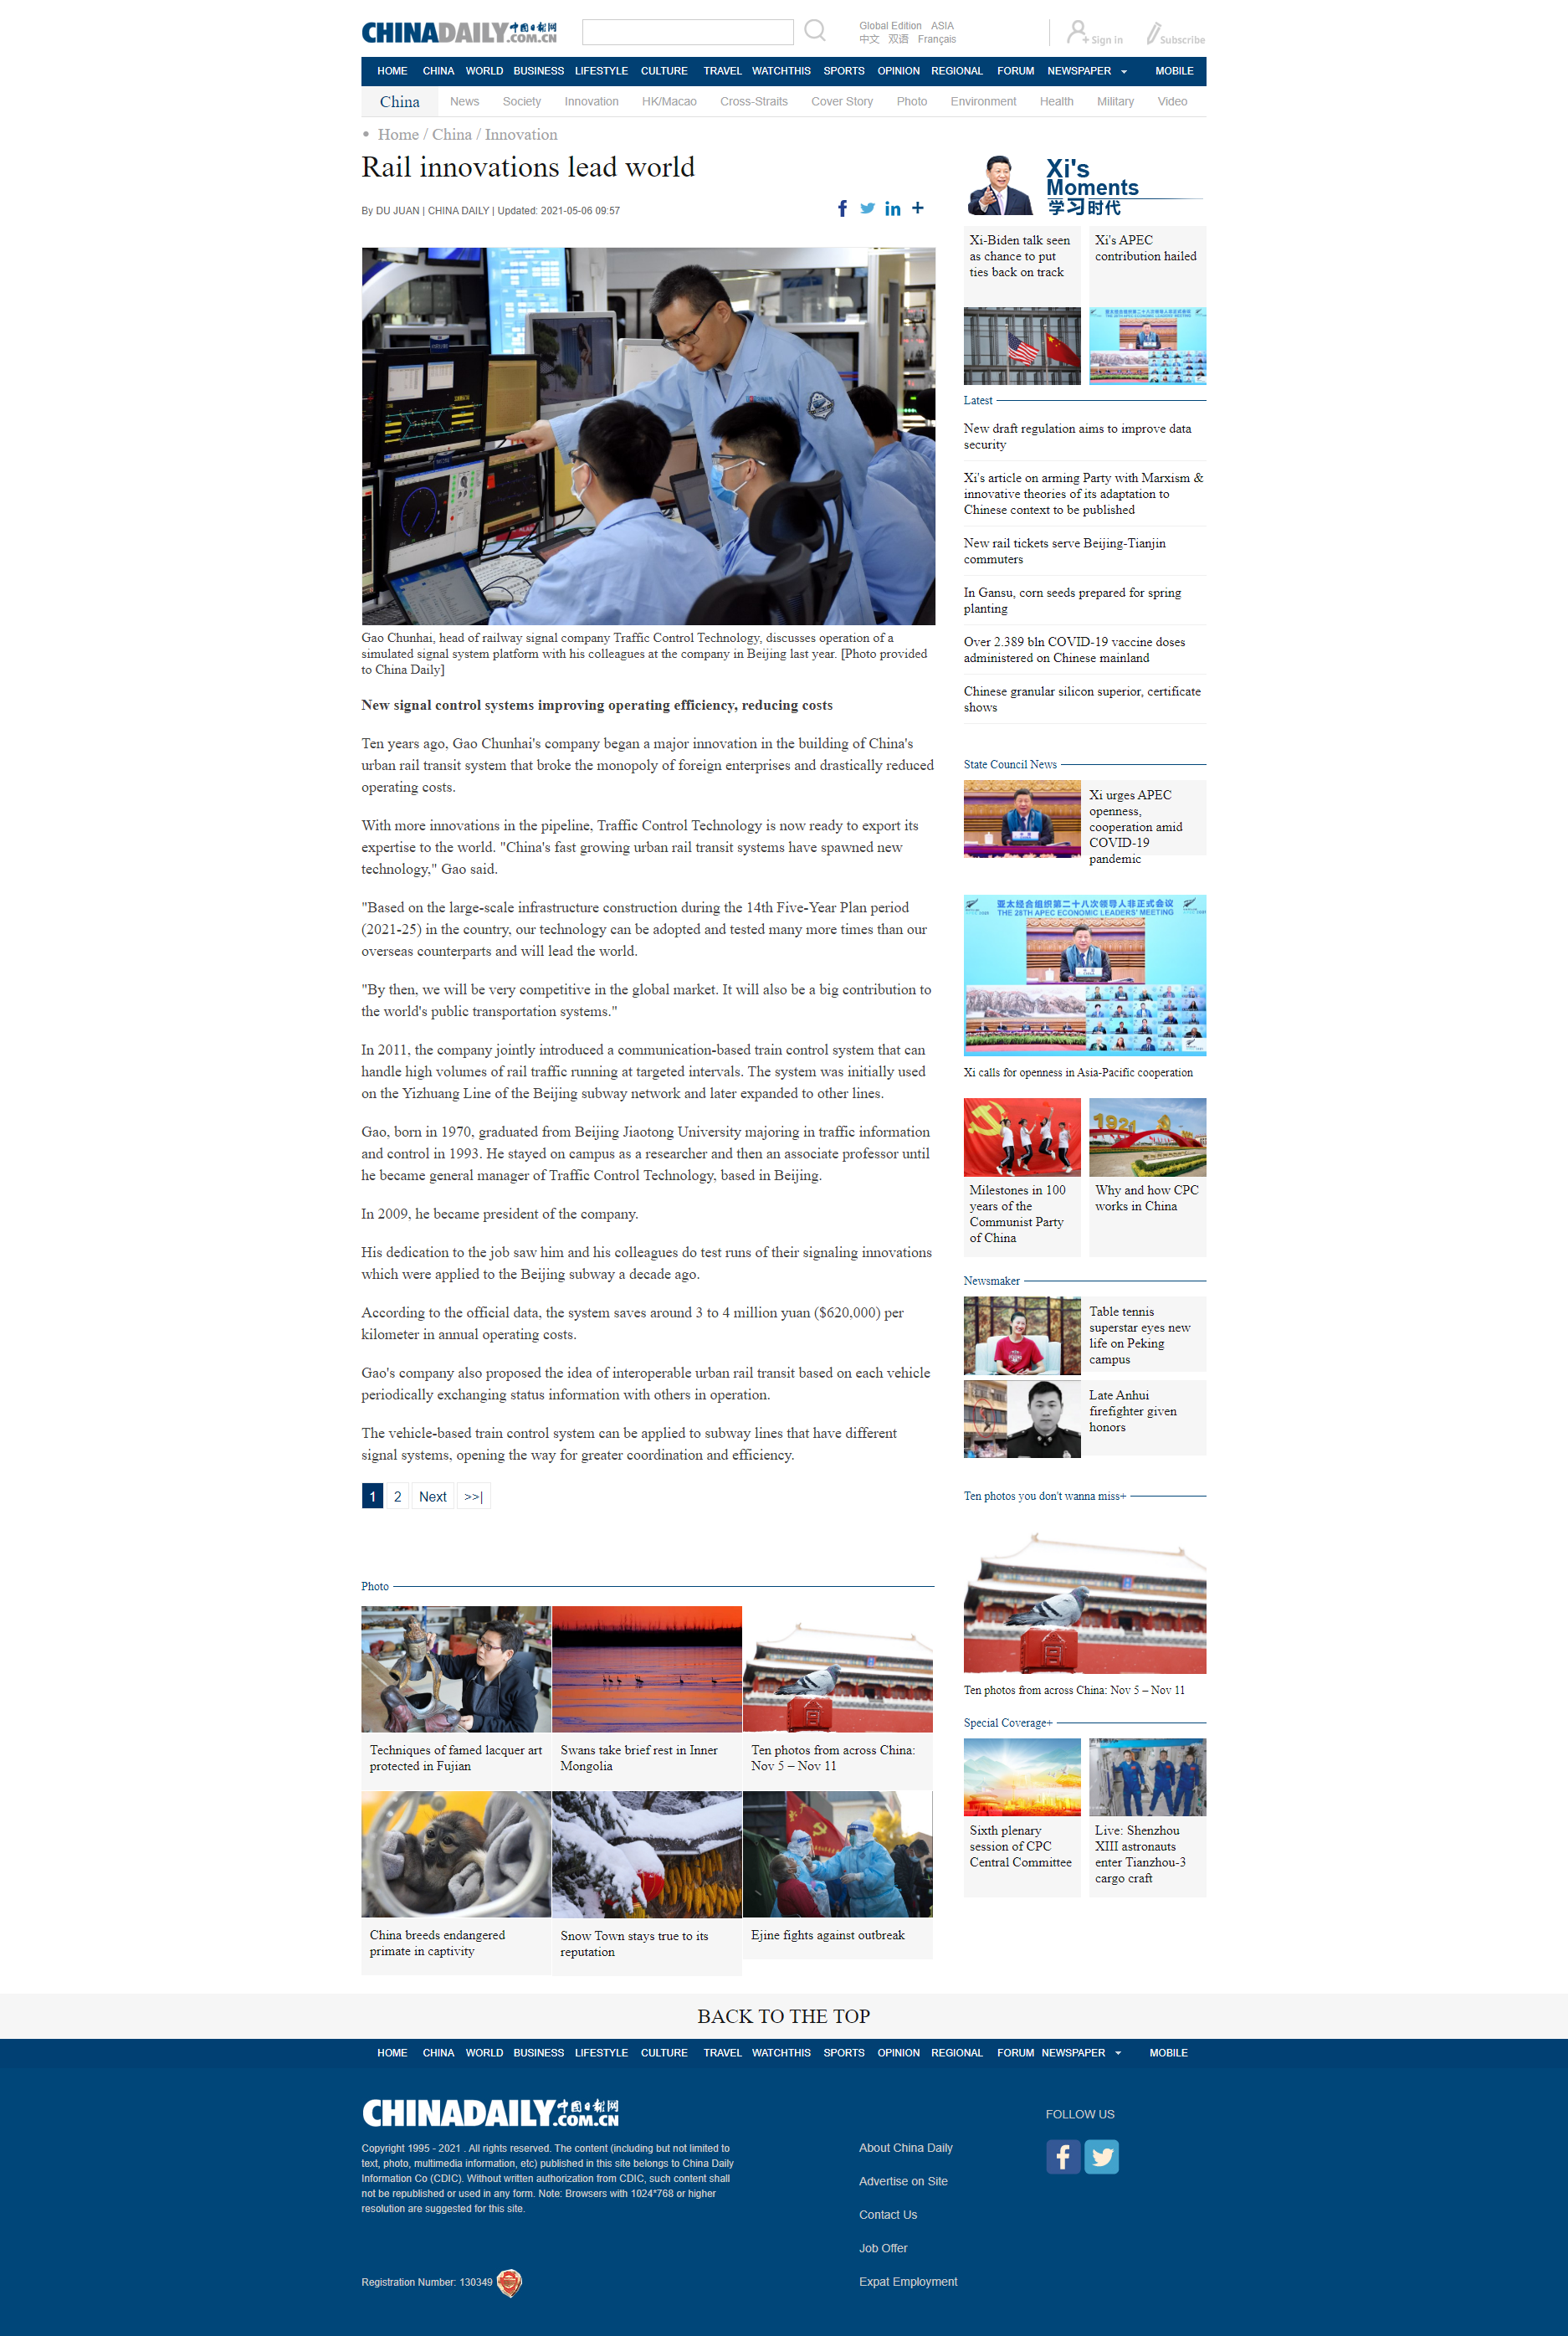 Rail innovations lead world - Chinadaily.com.cn.png